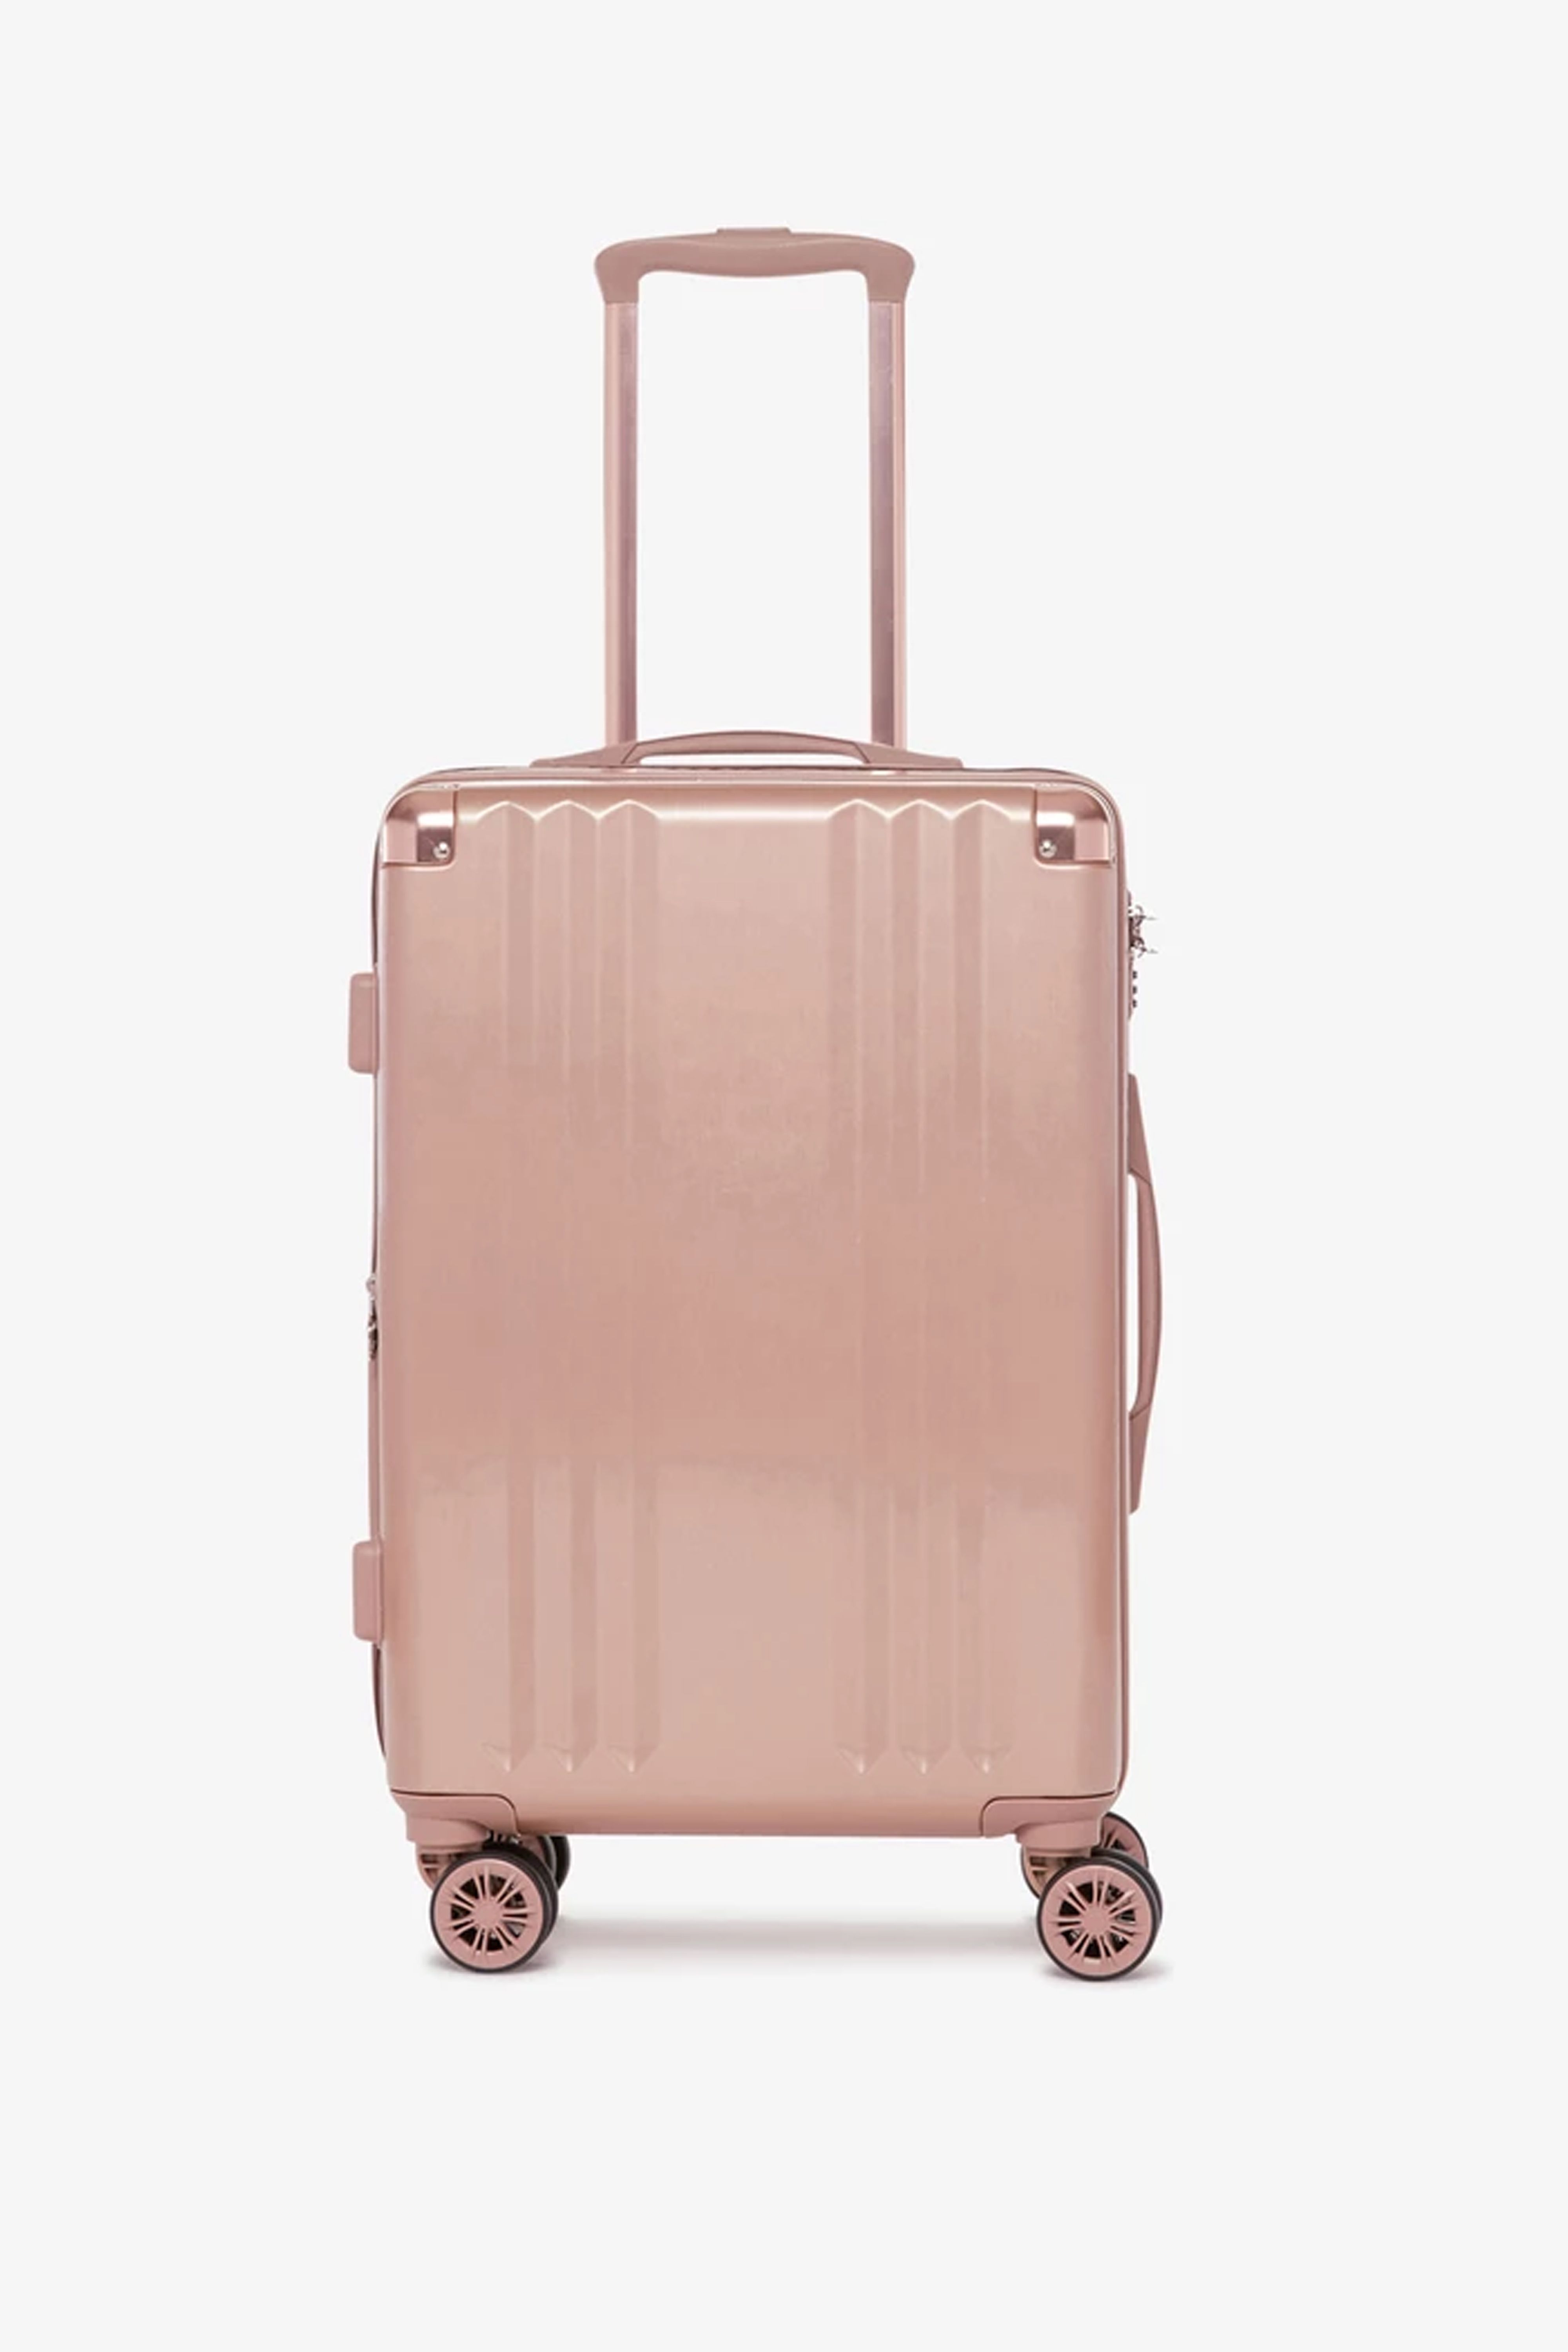 name brand carry on luggage